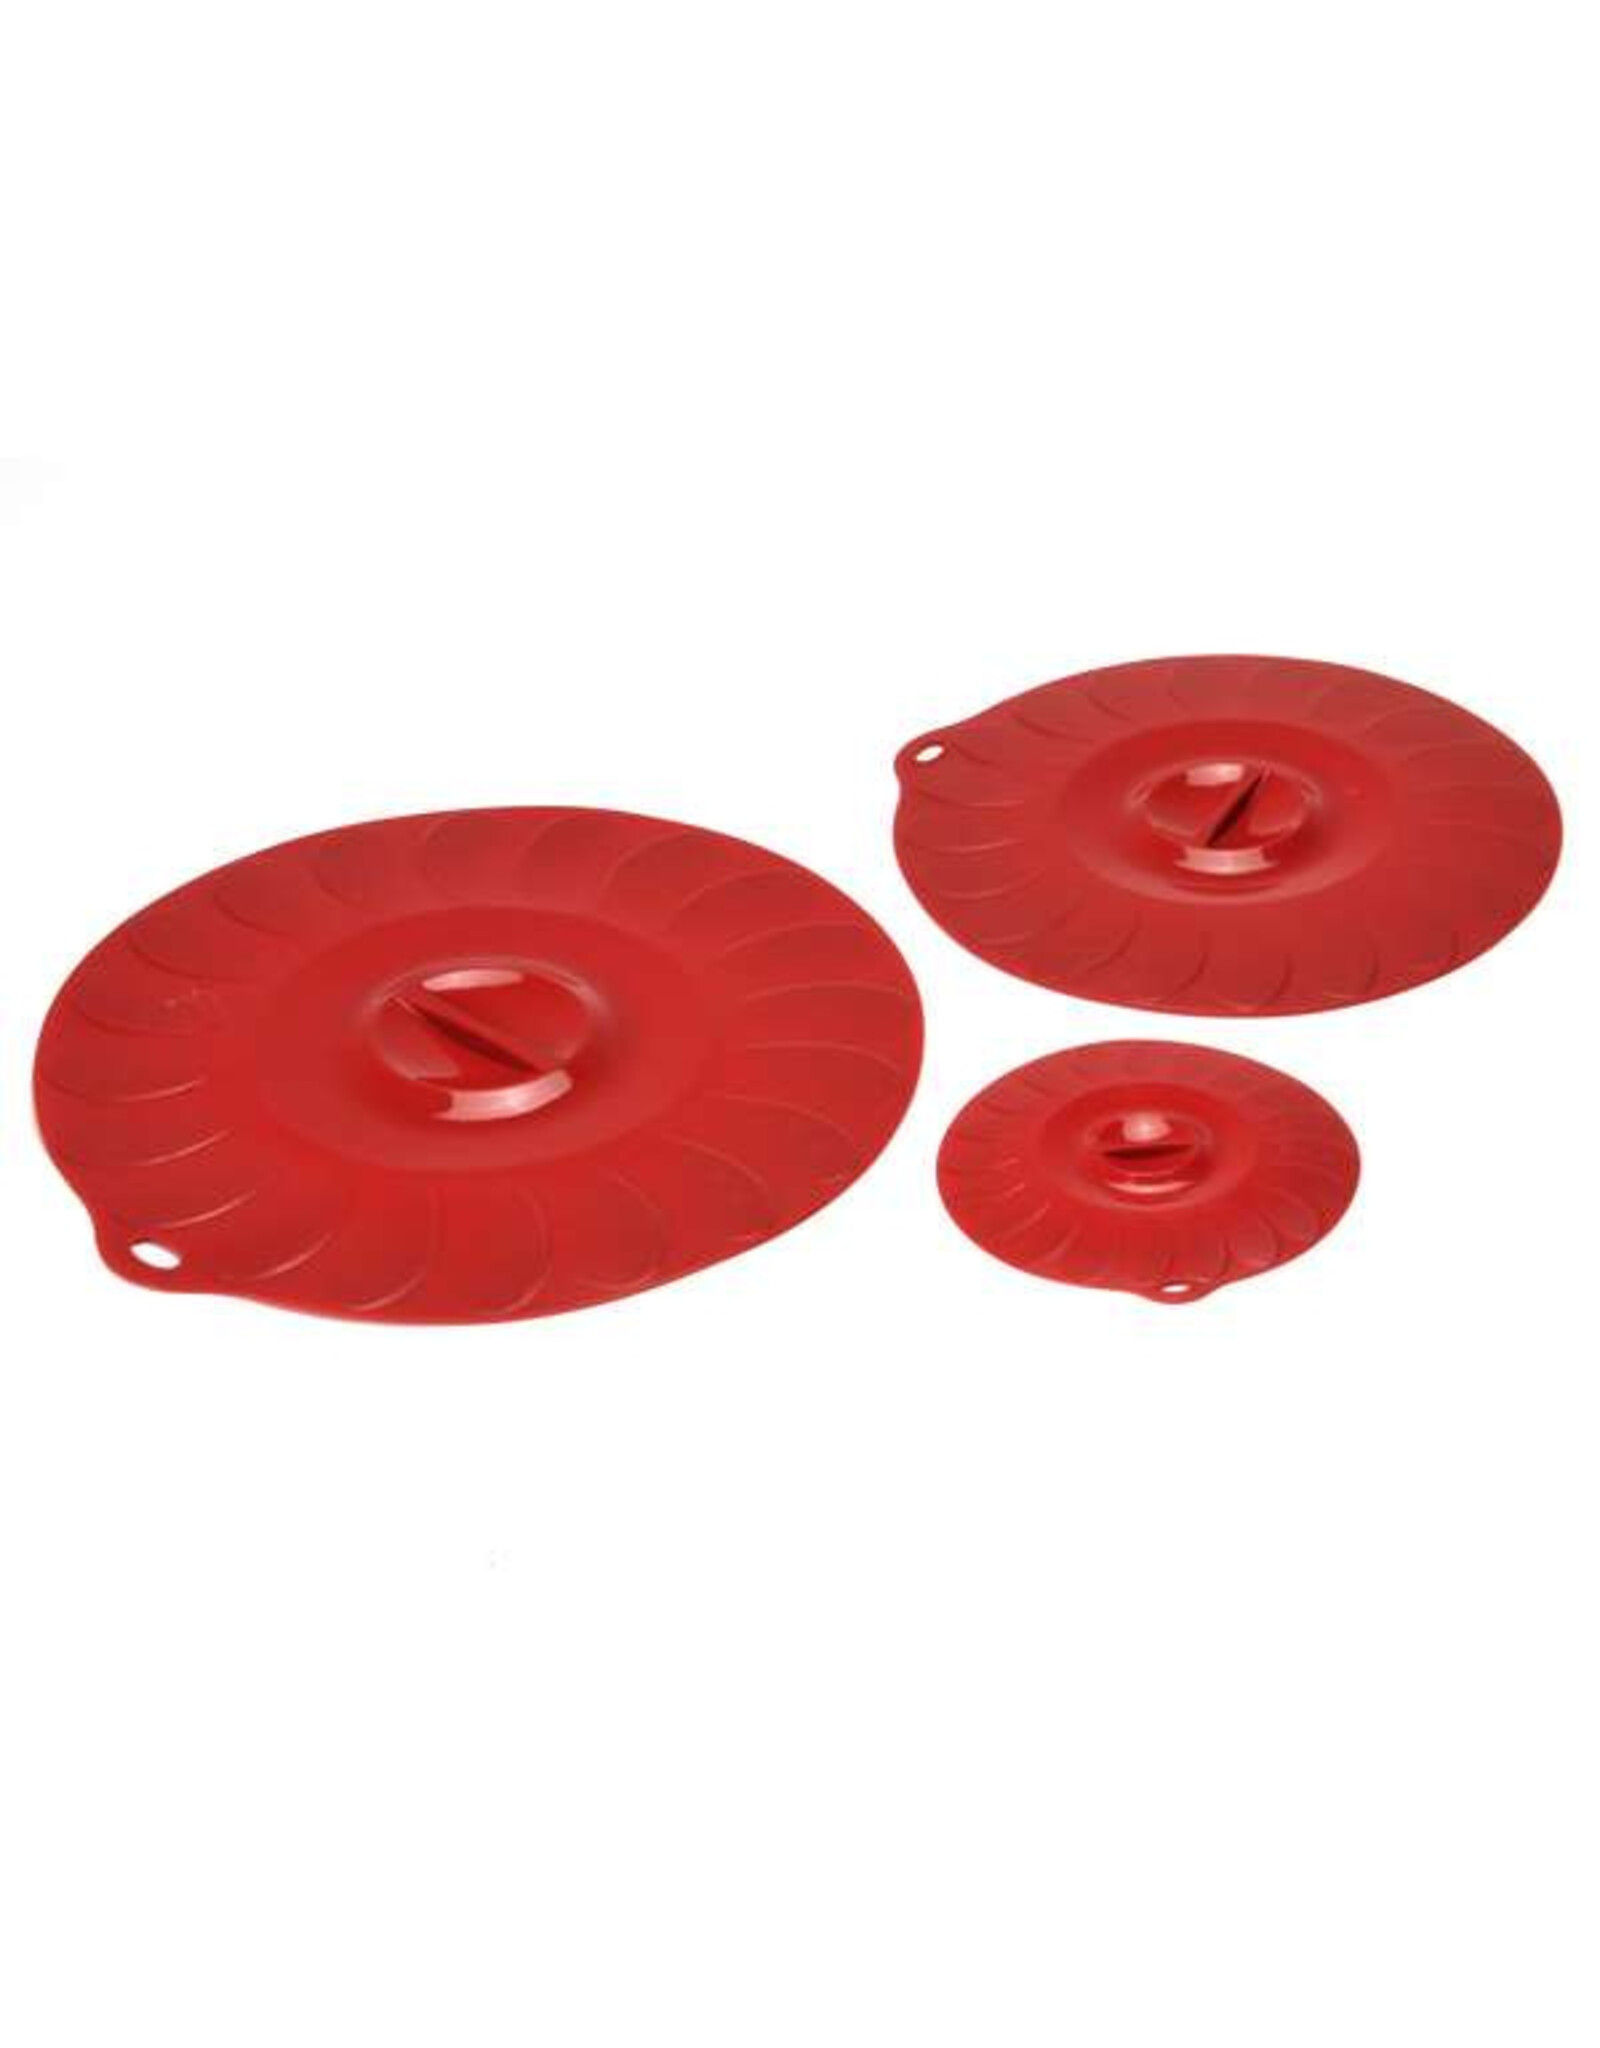 Silicone Universal Suction Lids Set of 3